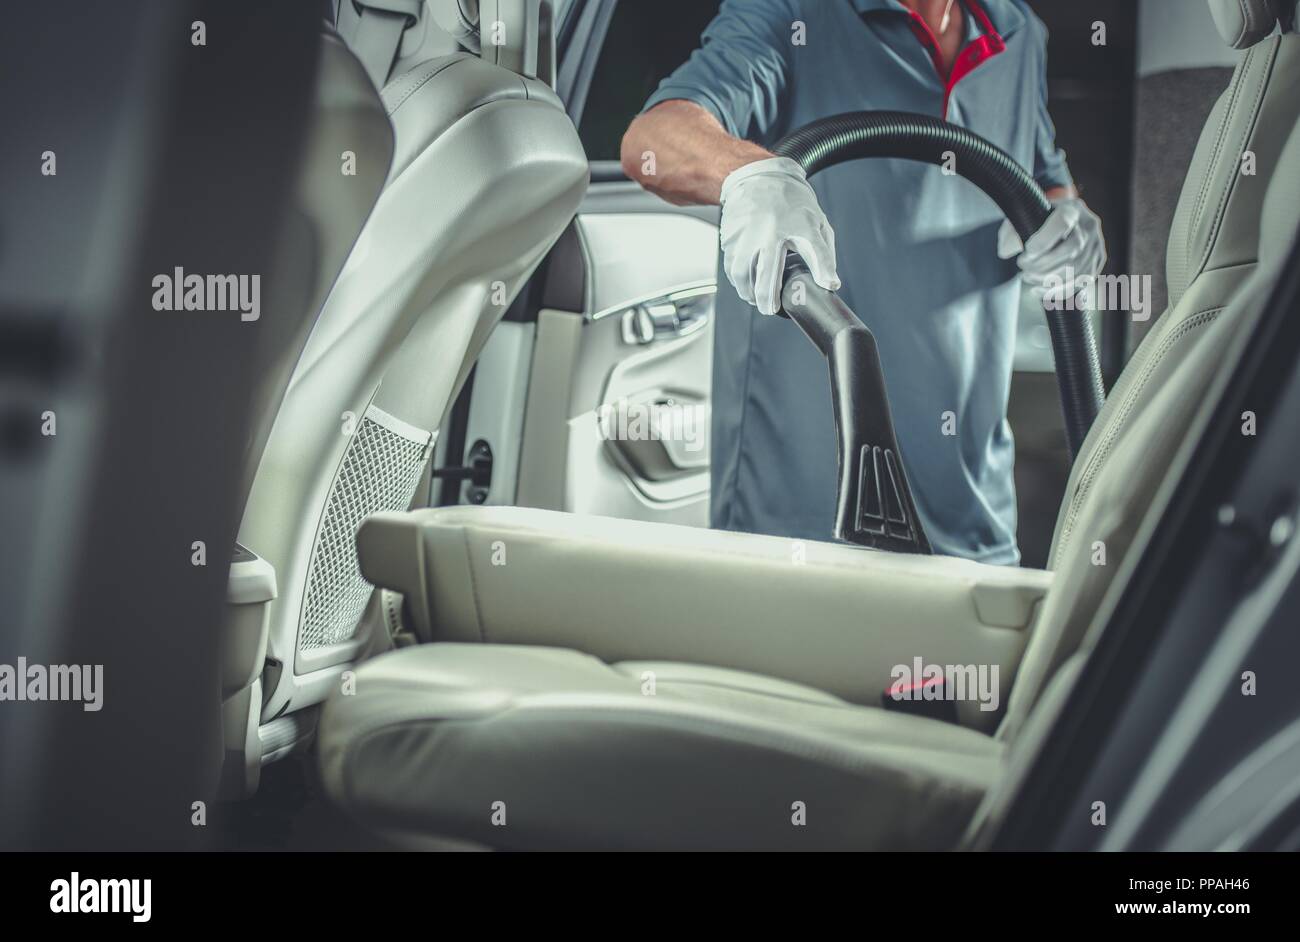 Professional Car Vacuuming in the Vehicles Cleaning and Detailing Service. Automotive Theme. Stock Photo